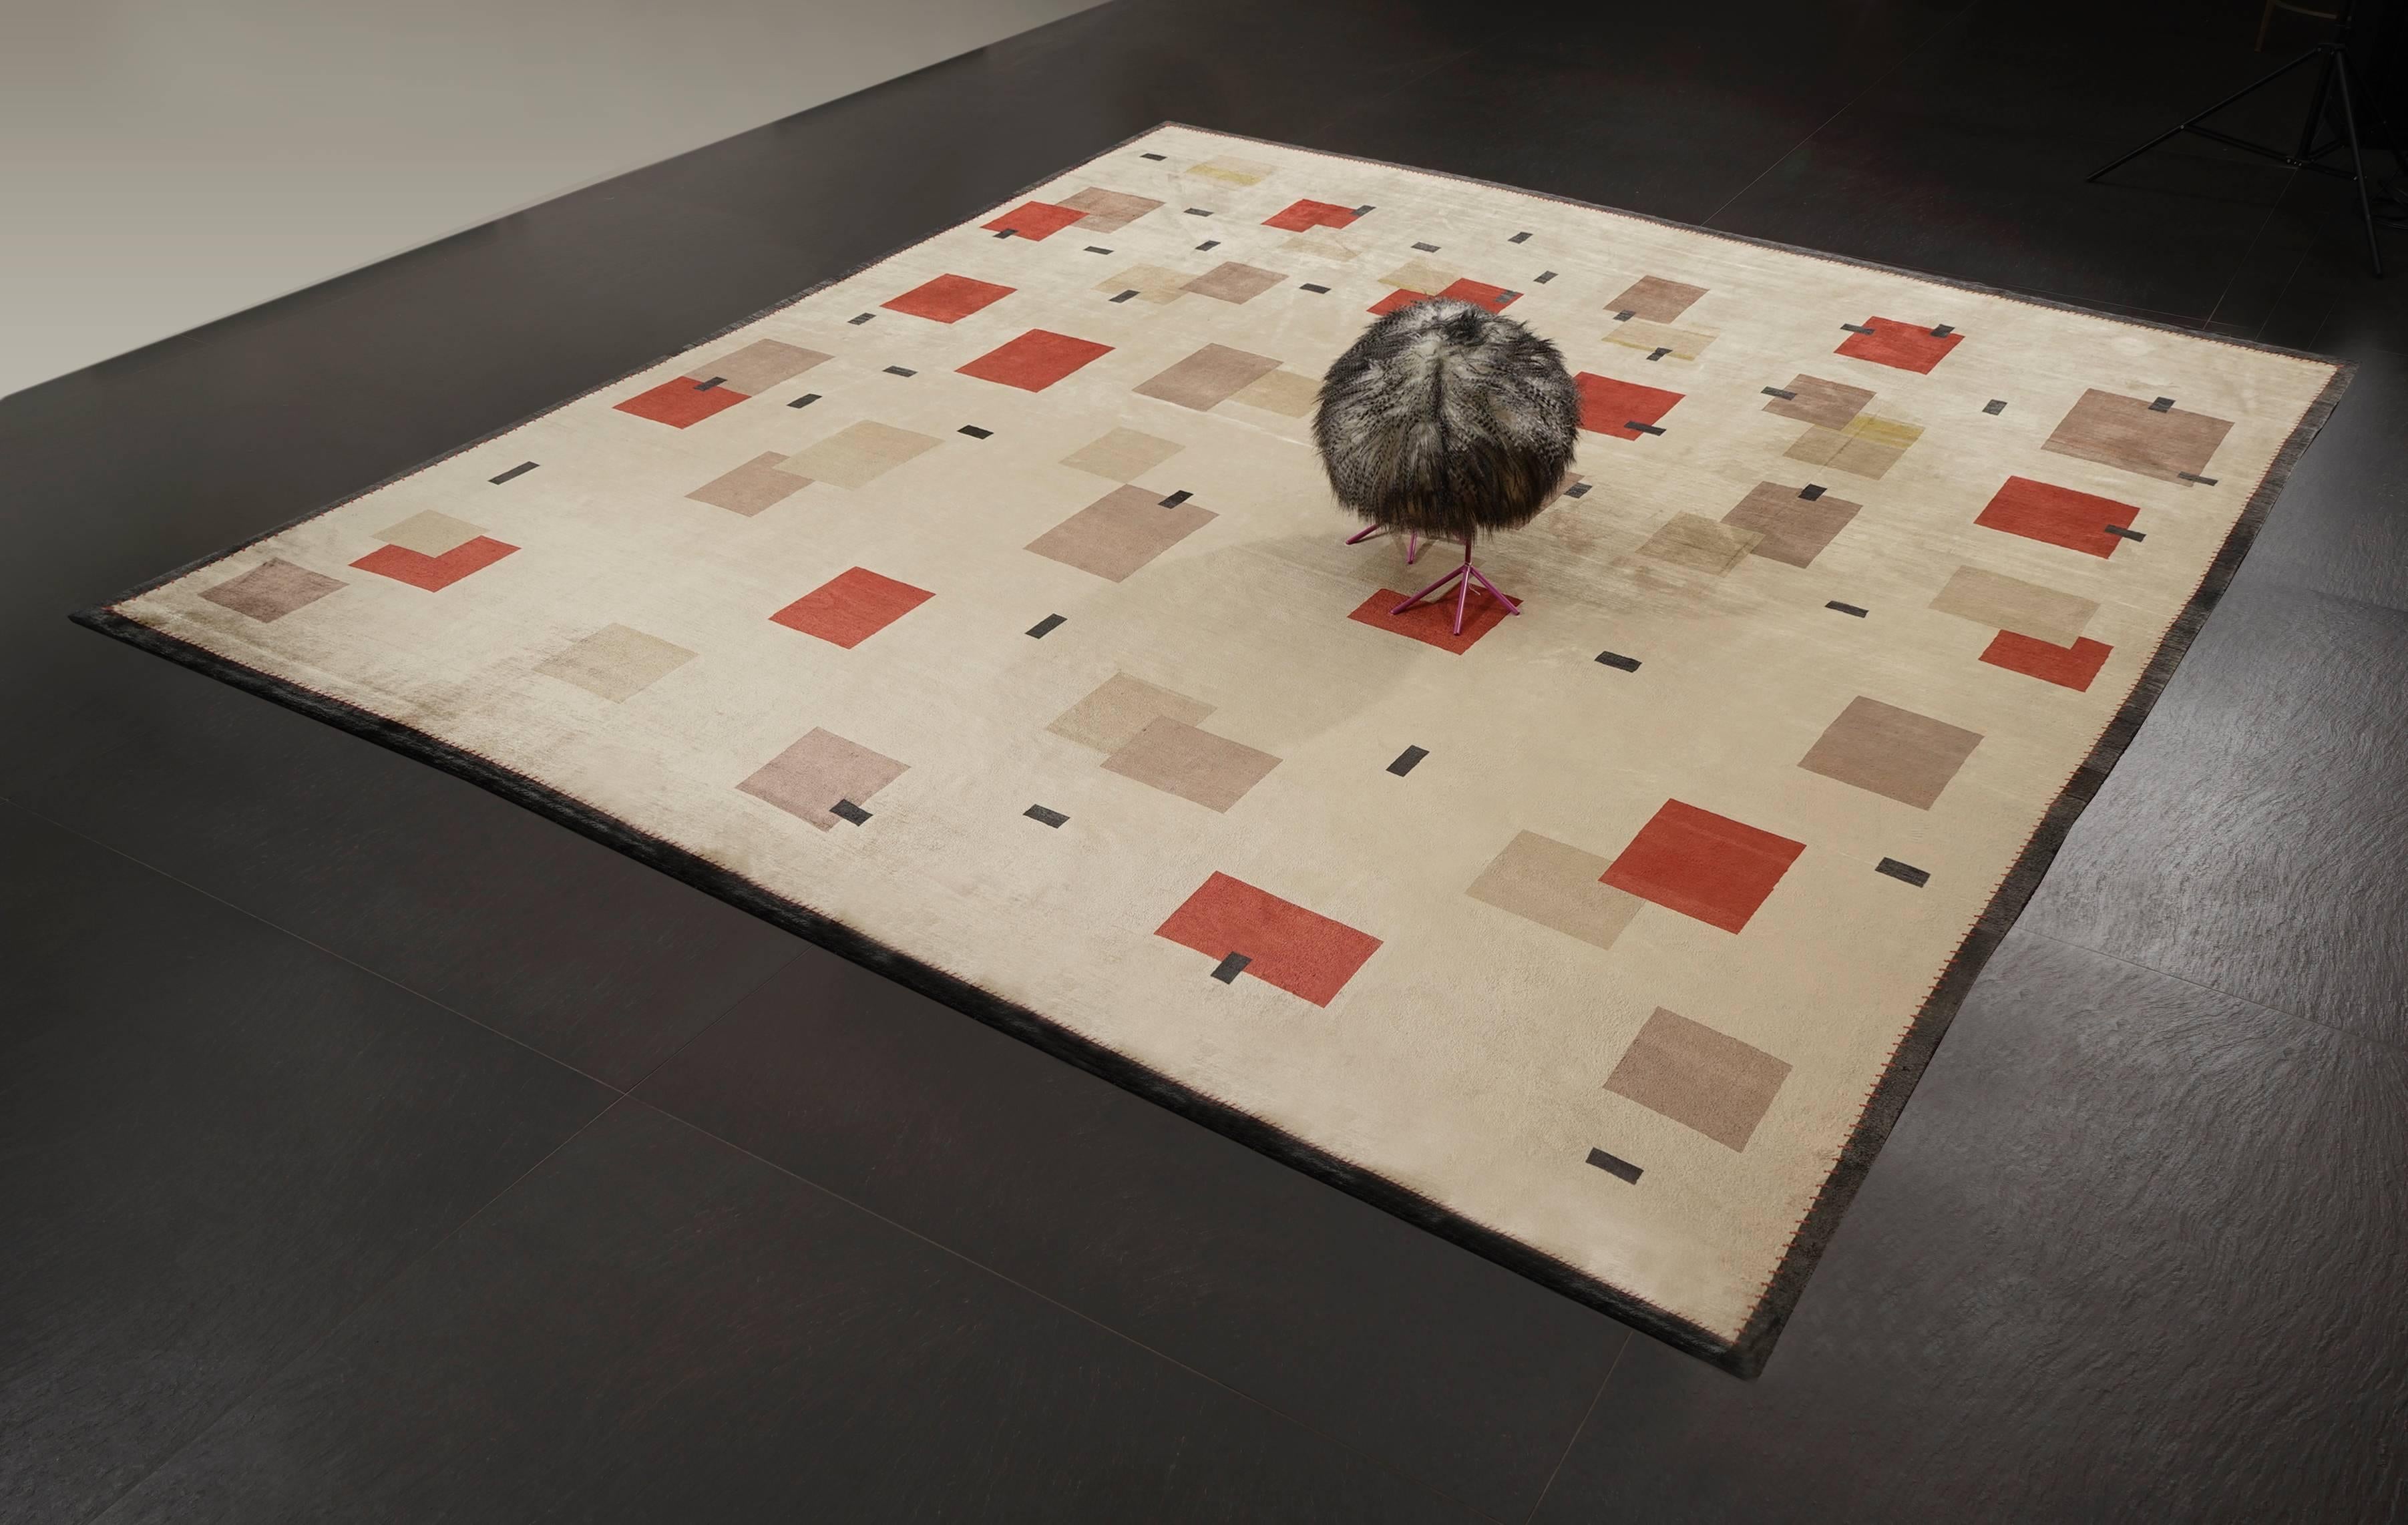 Natural silk rug by Didier Marien - N.11.

Dimensions: 330 X 310 cm.
Composition: Natural silk.
Handwoven.
Artist: Didier Marien.

For any customization on this rug, or bespoke edition, please contact the Boccara Gallery office.

Didier